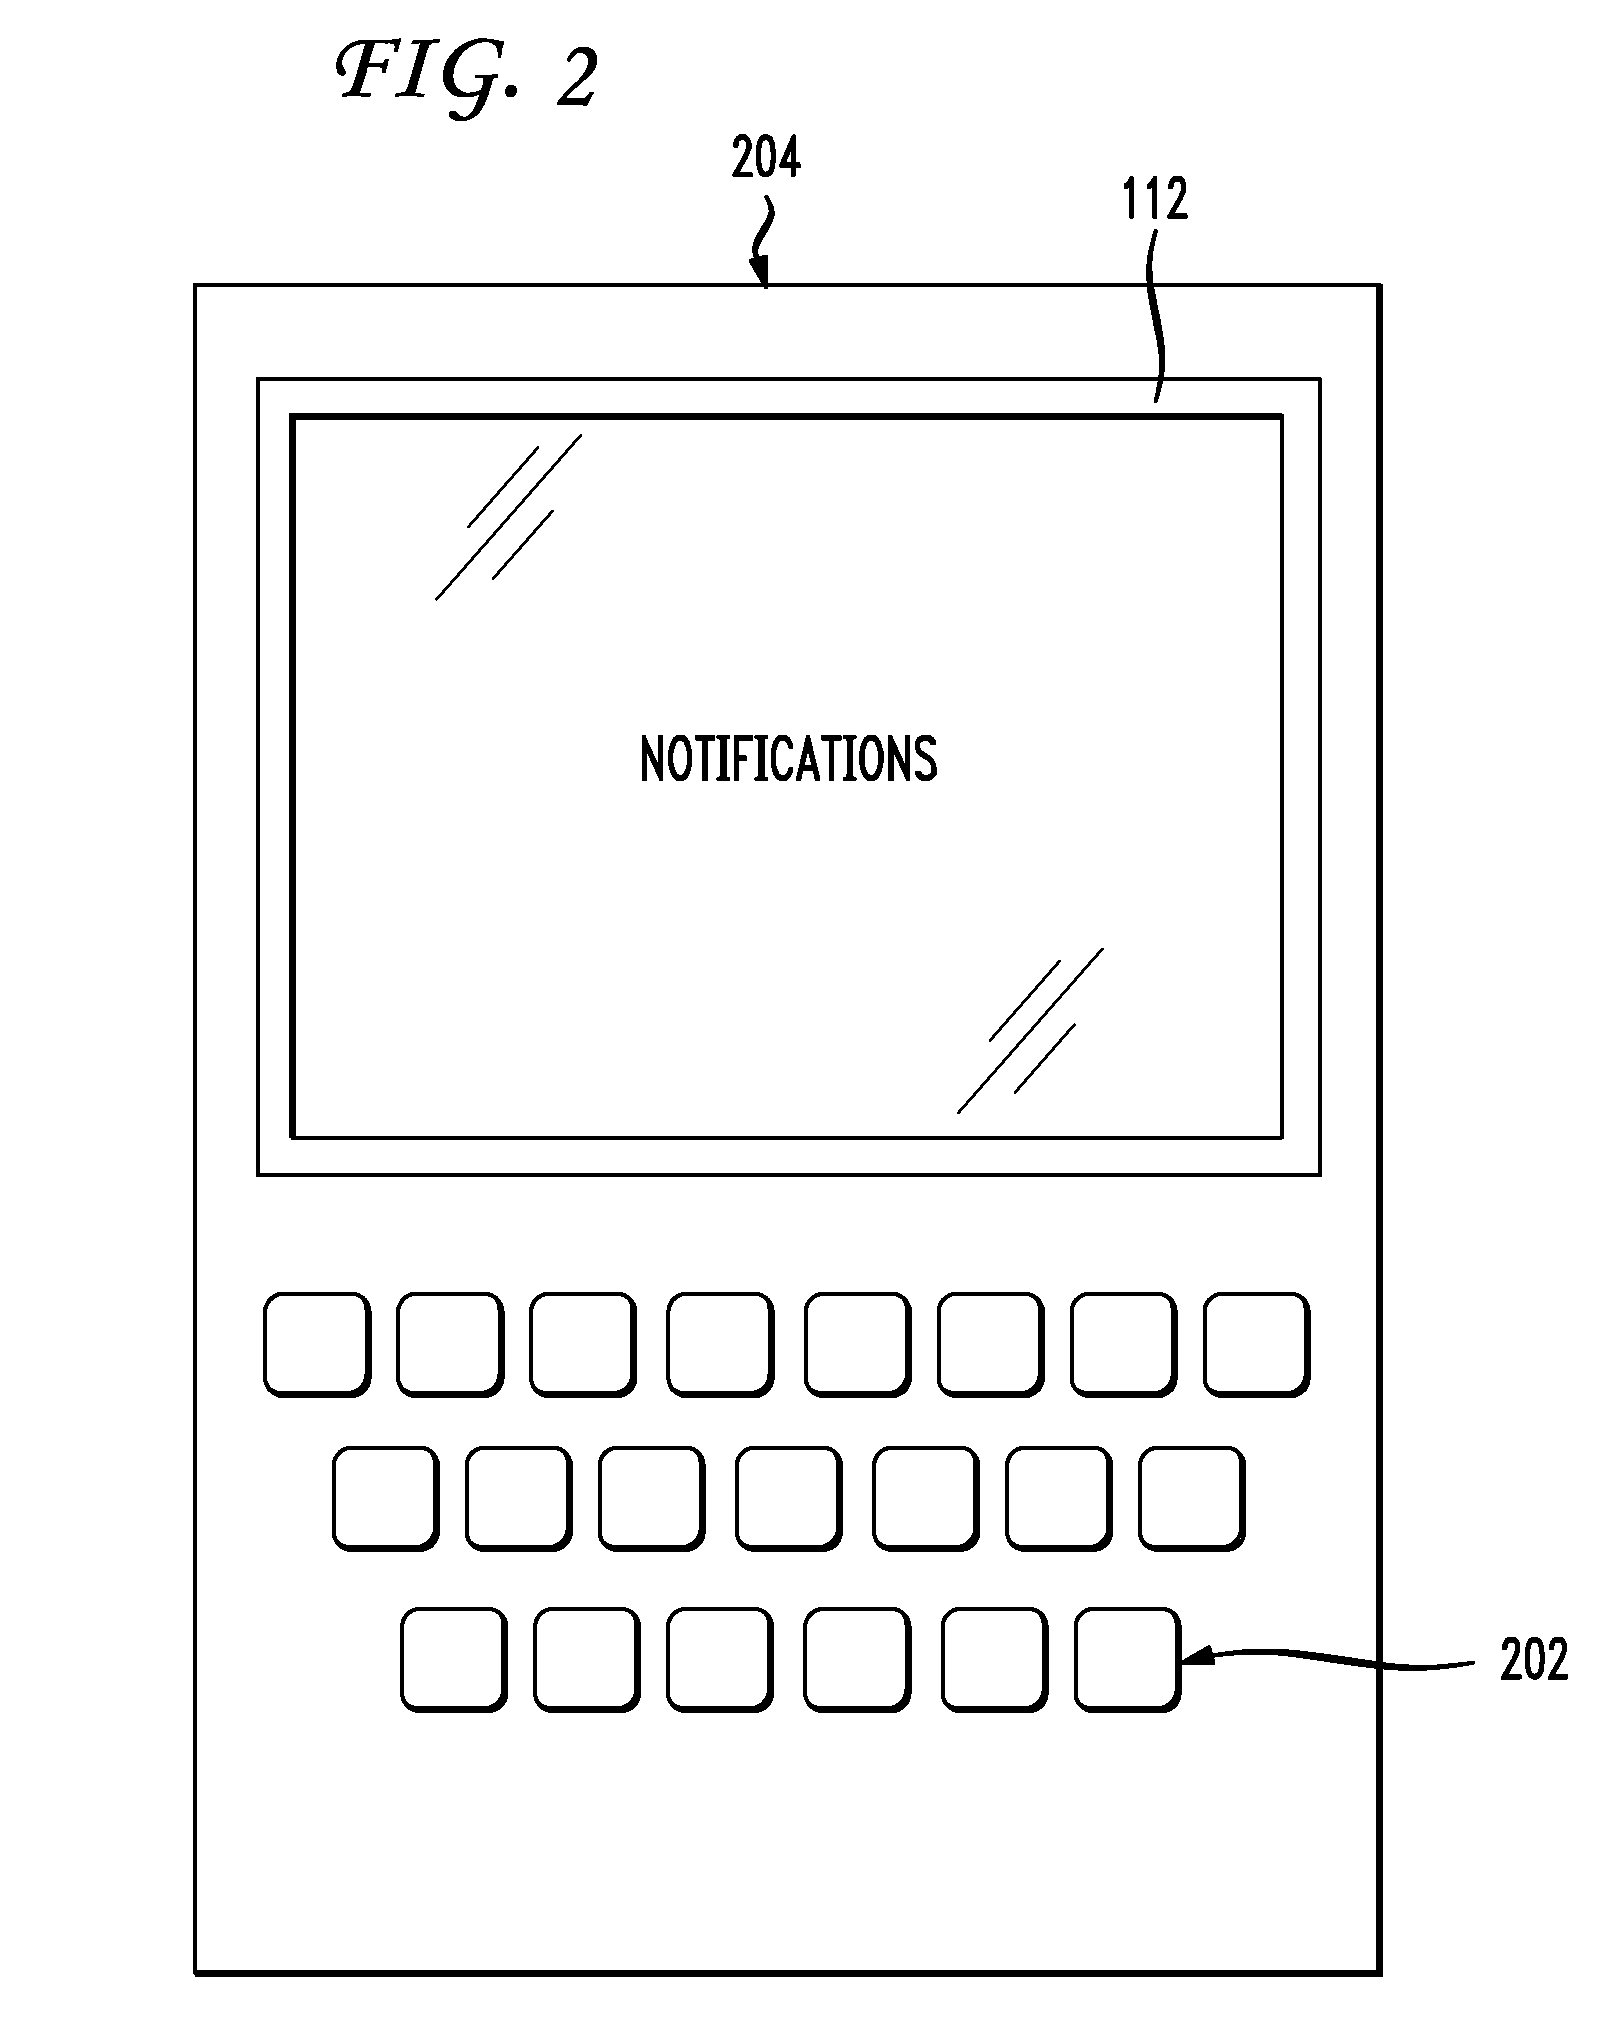 System and method for presenting recently-used and in-use applications for ease of navigation on an electronic device